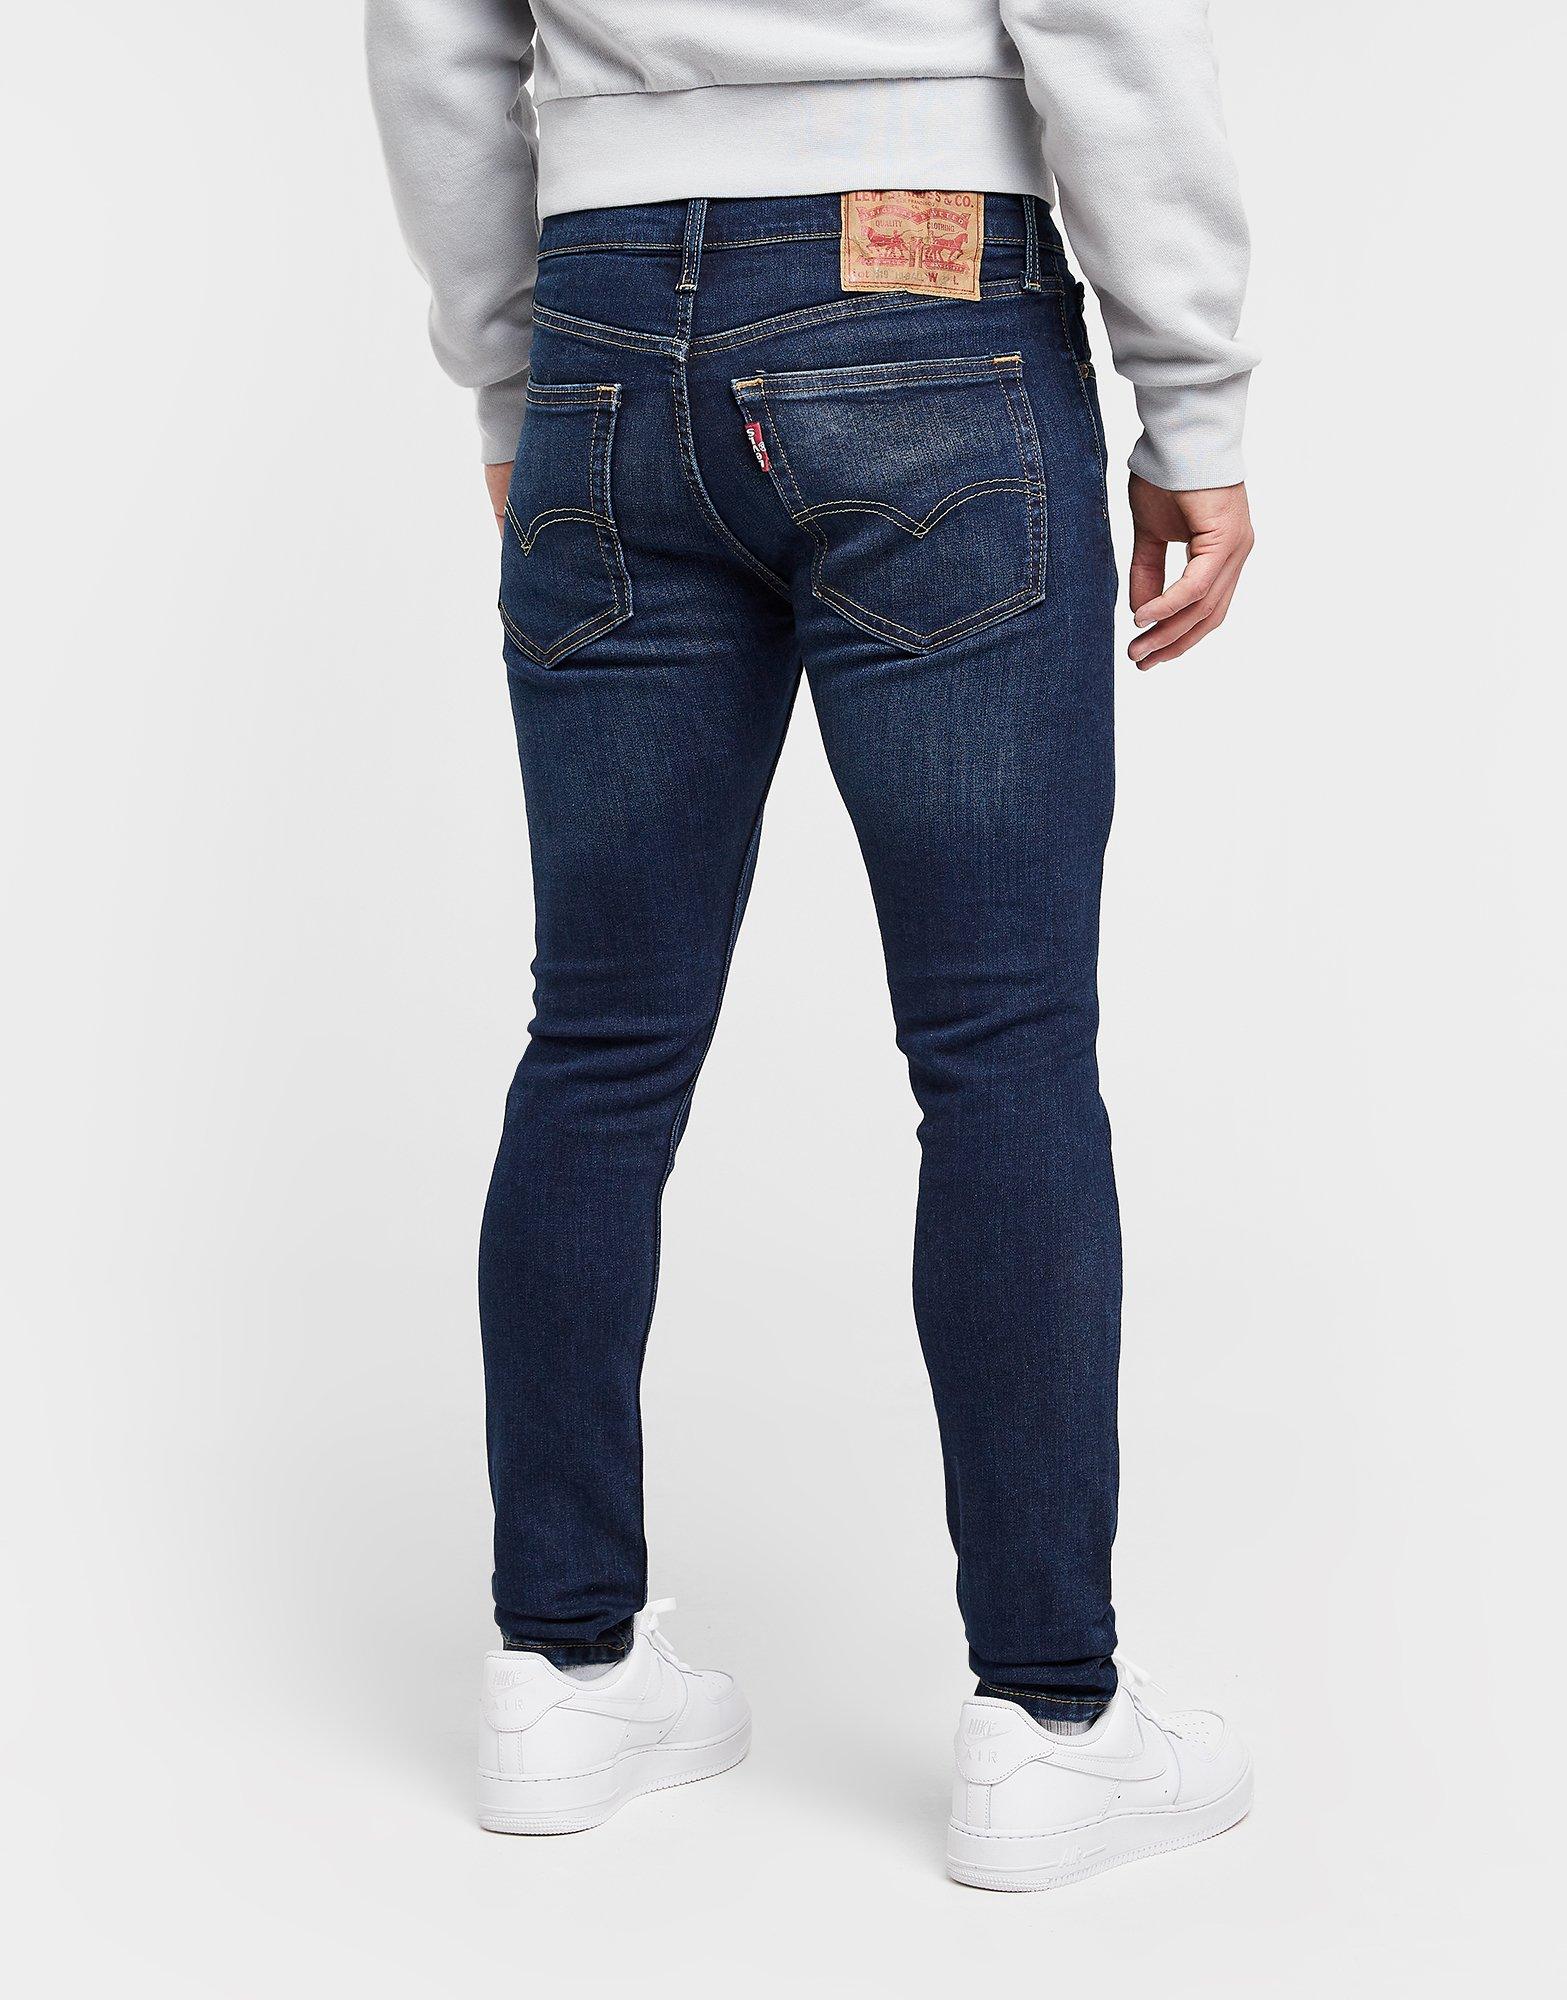 ball jeans